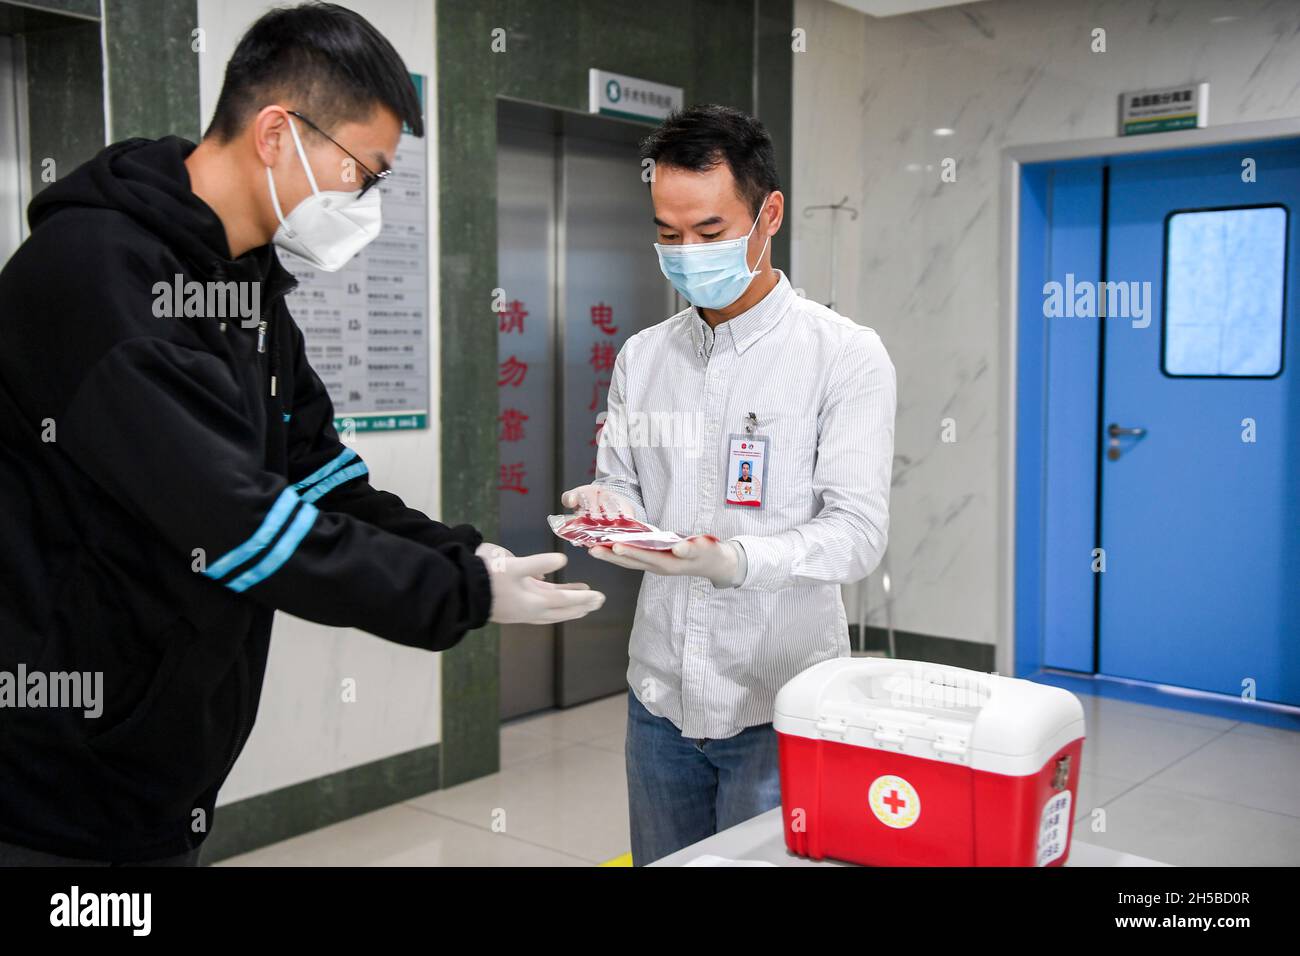 (211108) -- NANNING, Nov. 8, 2021 (Xinhua) -- Staff members deliver hematopoietic stem cells collected from doctor Li at the First Affiliated Hospital of Guangxi Medical University in Nanning, south China's Guangxi Zhuang Autonomous Region in November of 2021. Li, a doctor of the hematology department of the First Affiliated Hospital of Guangxi Medical University, registered with China Marrow Donor Program (CMDP) as potential hematopoietic stem cells (HSC) donors in November of 2011. As a doctor providing hematopoietic stem cell treatments for patients, he successfully matches a patient as Stock Photo